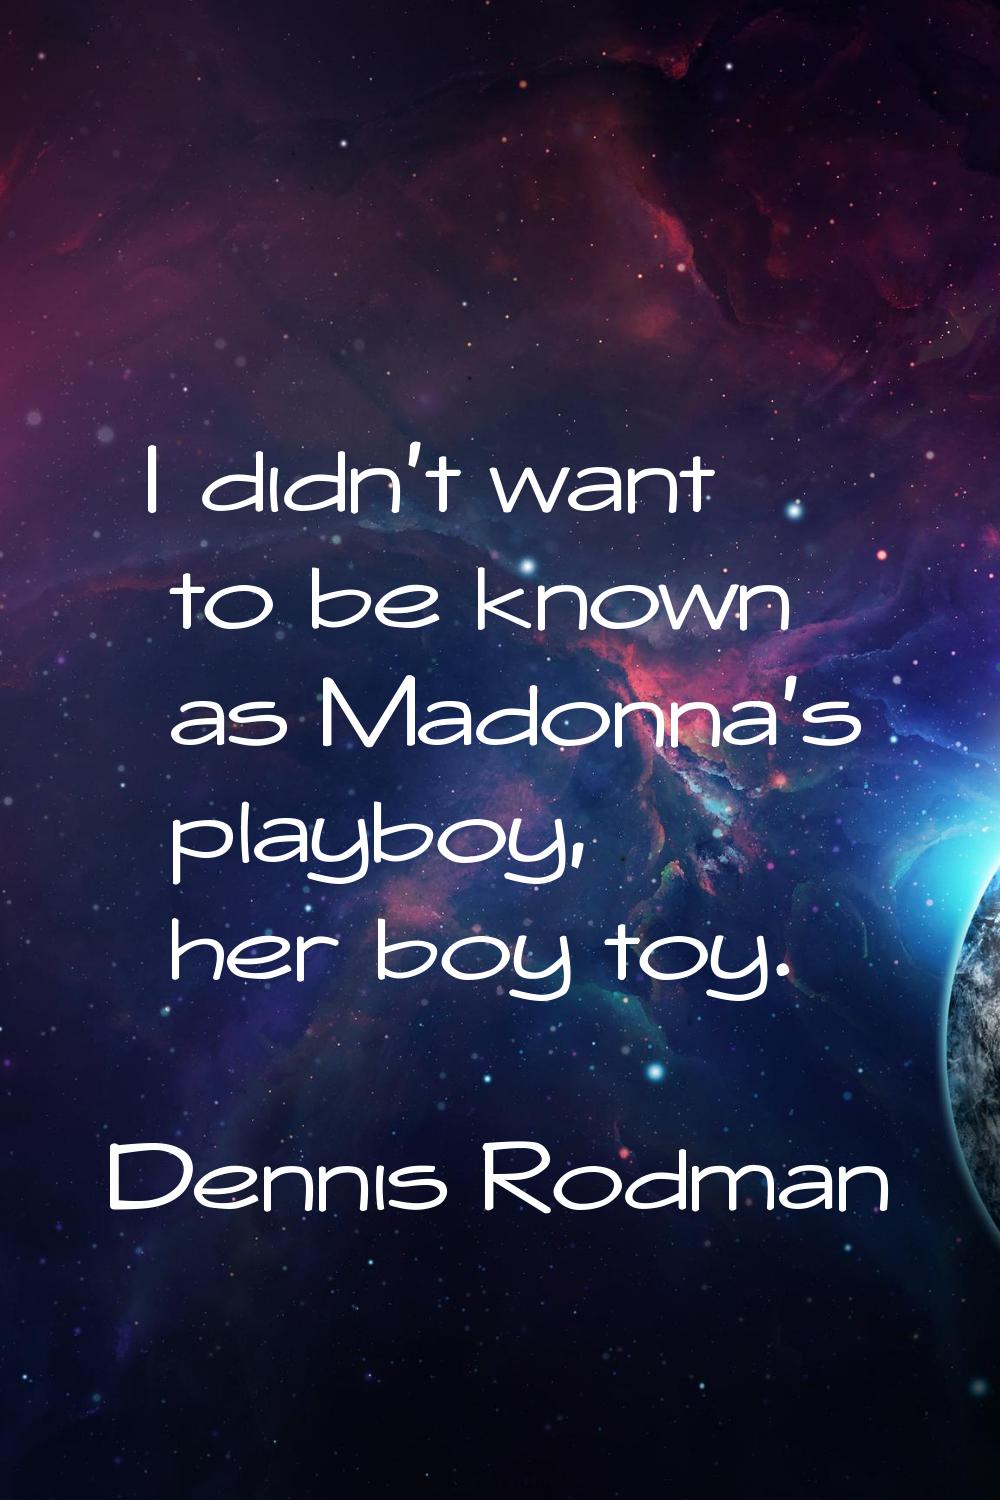 I didn't want to be known as Madonna's playboy, her boy toy.